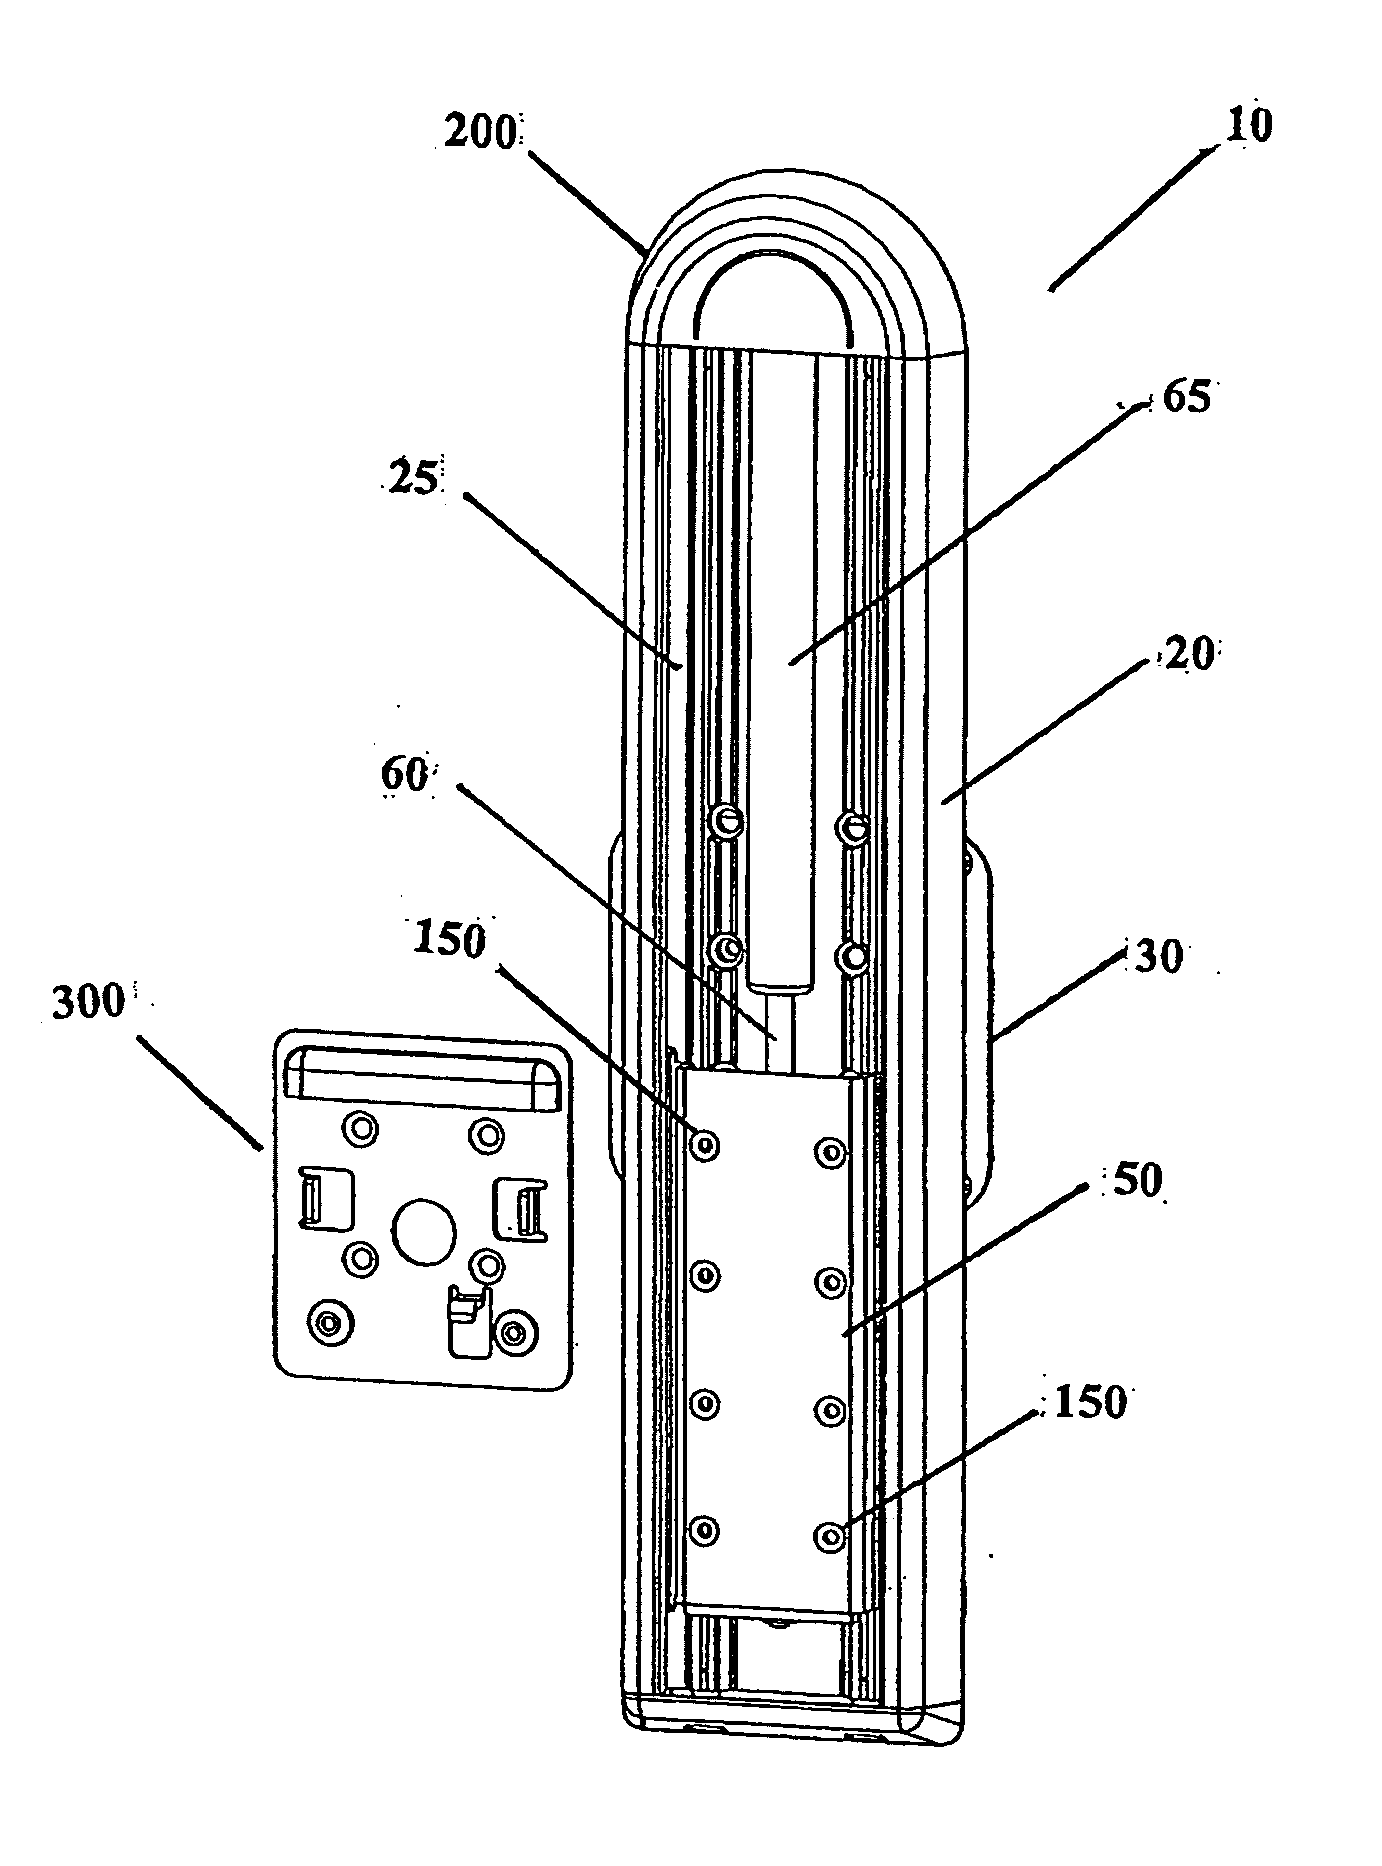 Mechanism for positional adjustment of an attached device